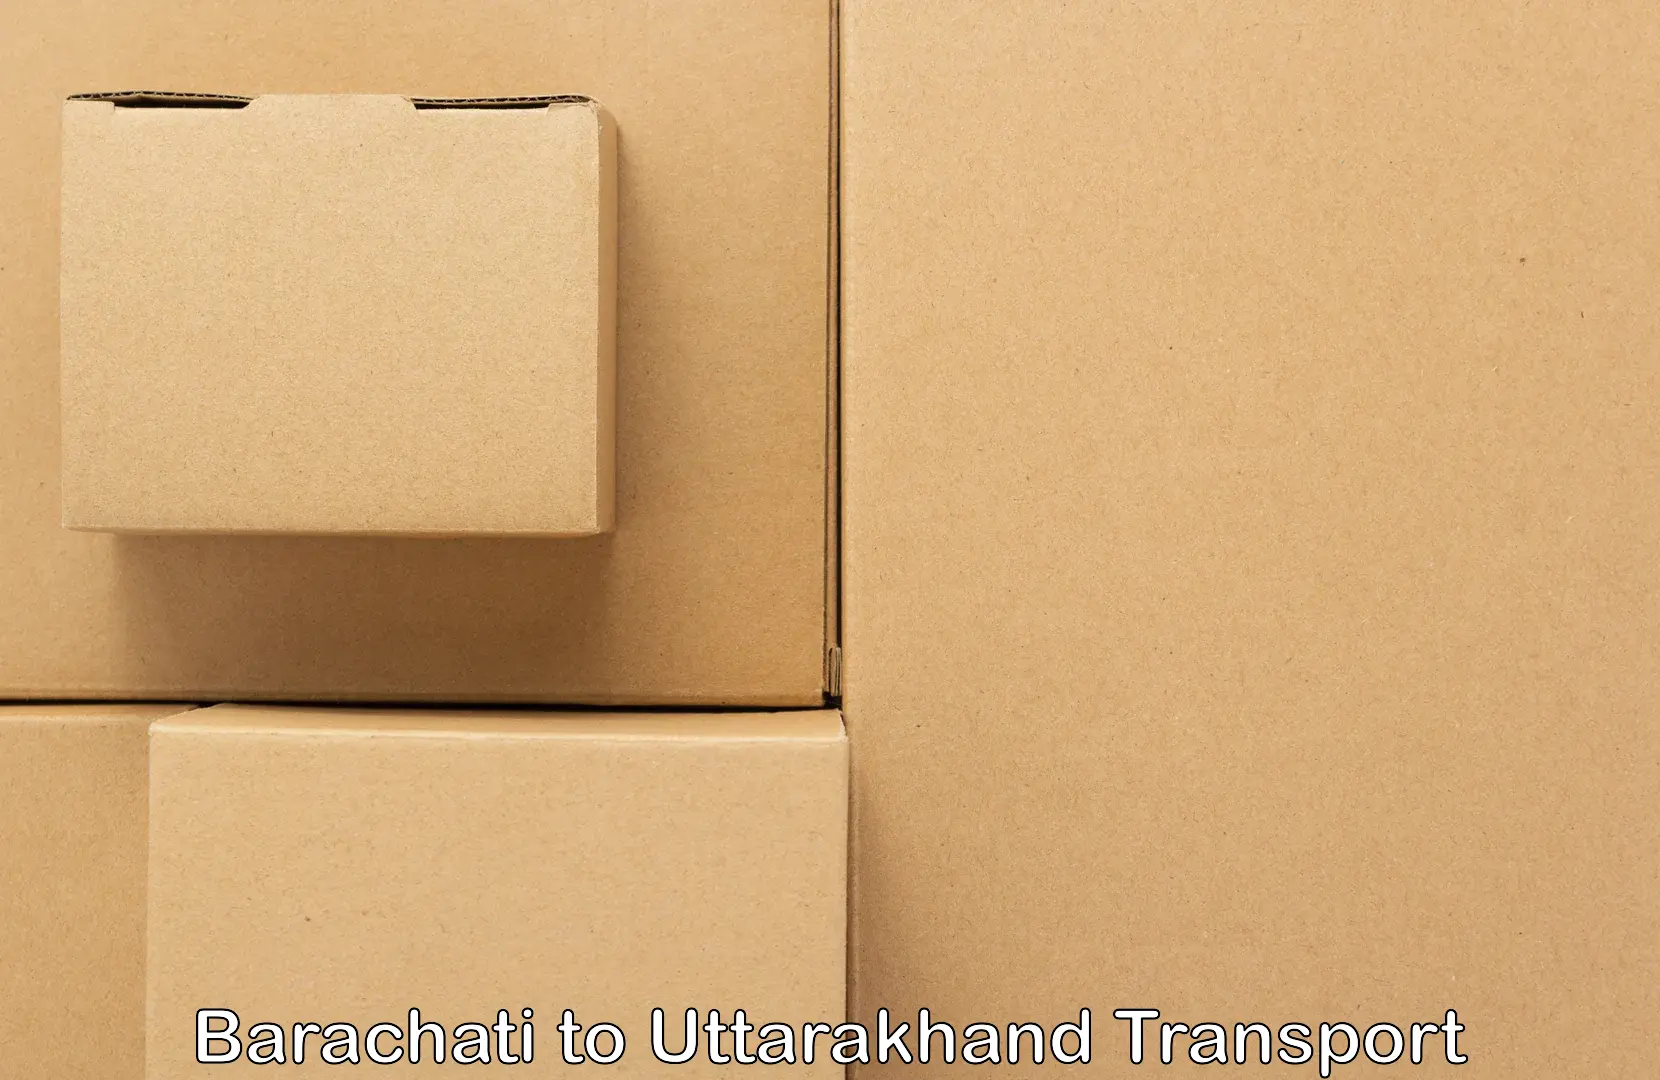 Daily parcel service transport in Barachati to IIT Roorkee